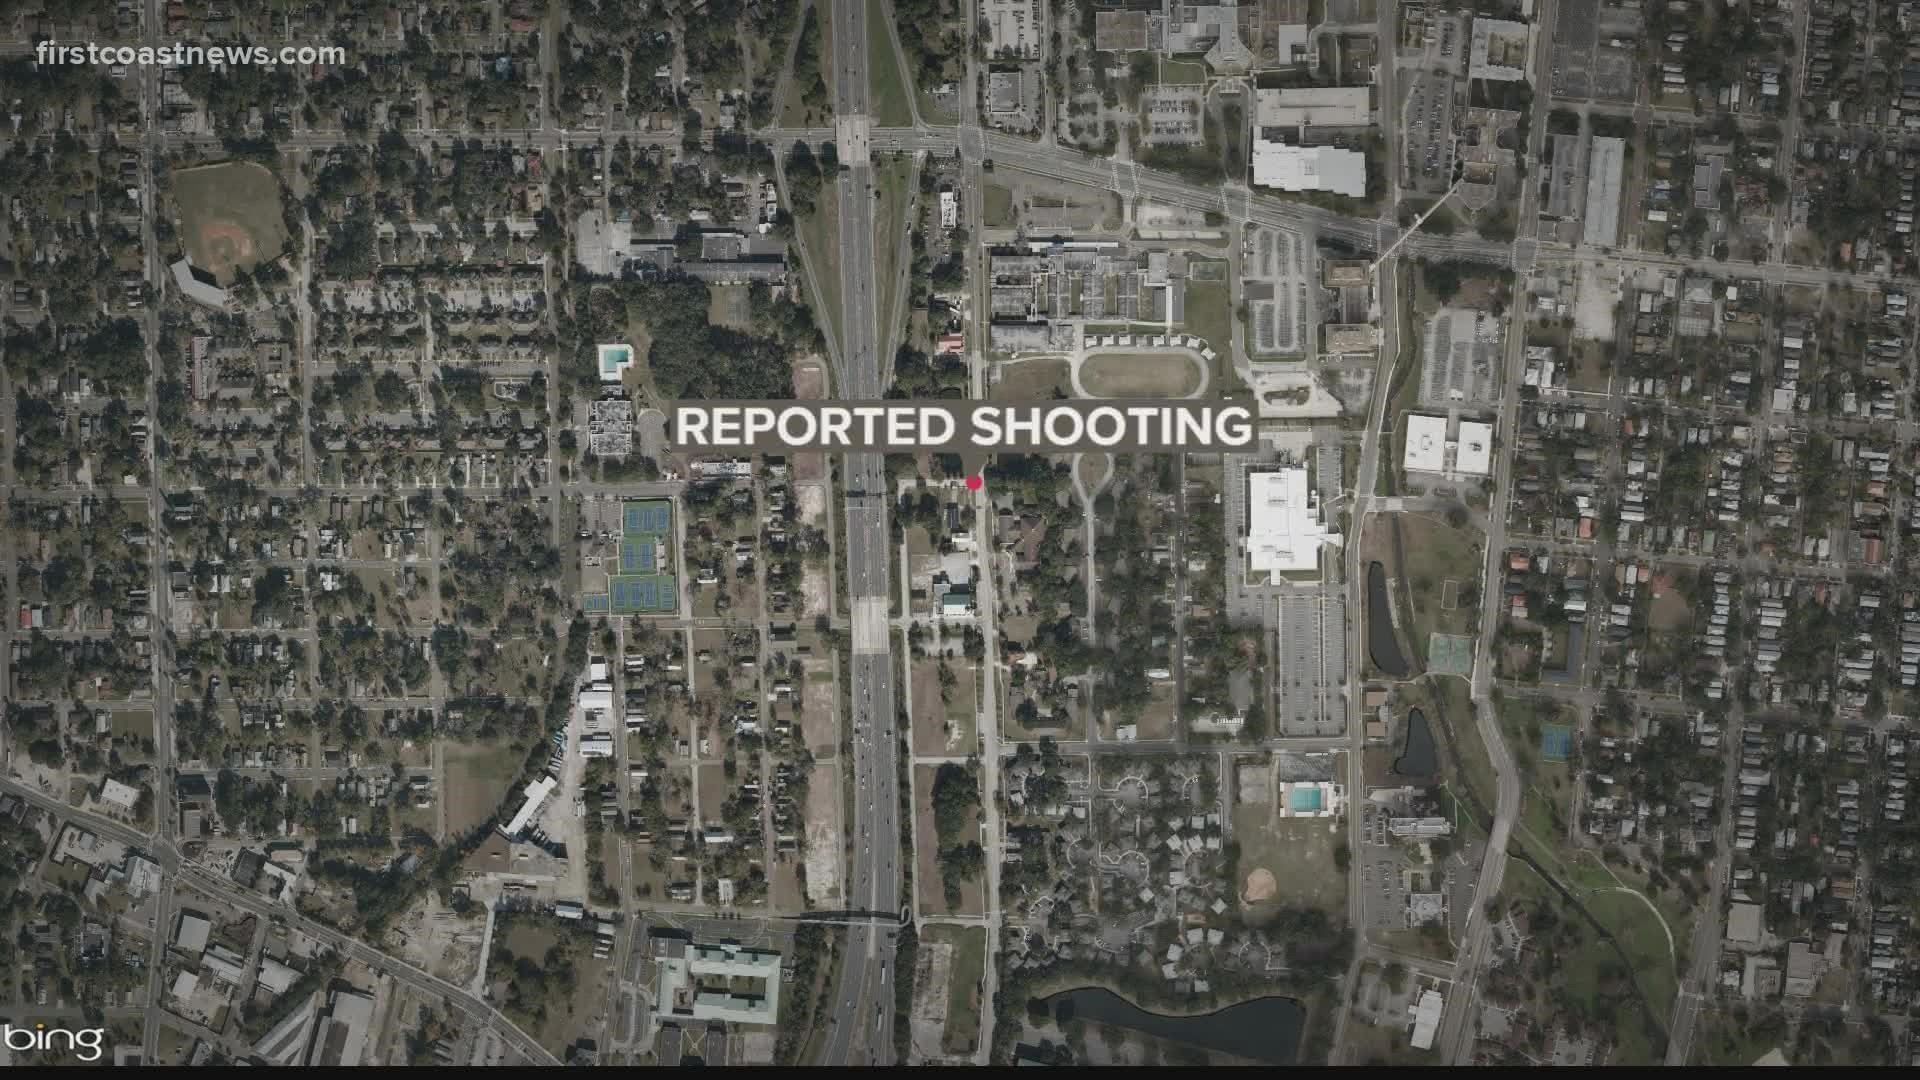 JSO said the shooting happened in the area of W 6th St. and N Davis St.